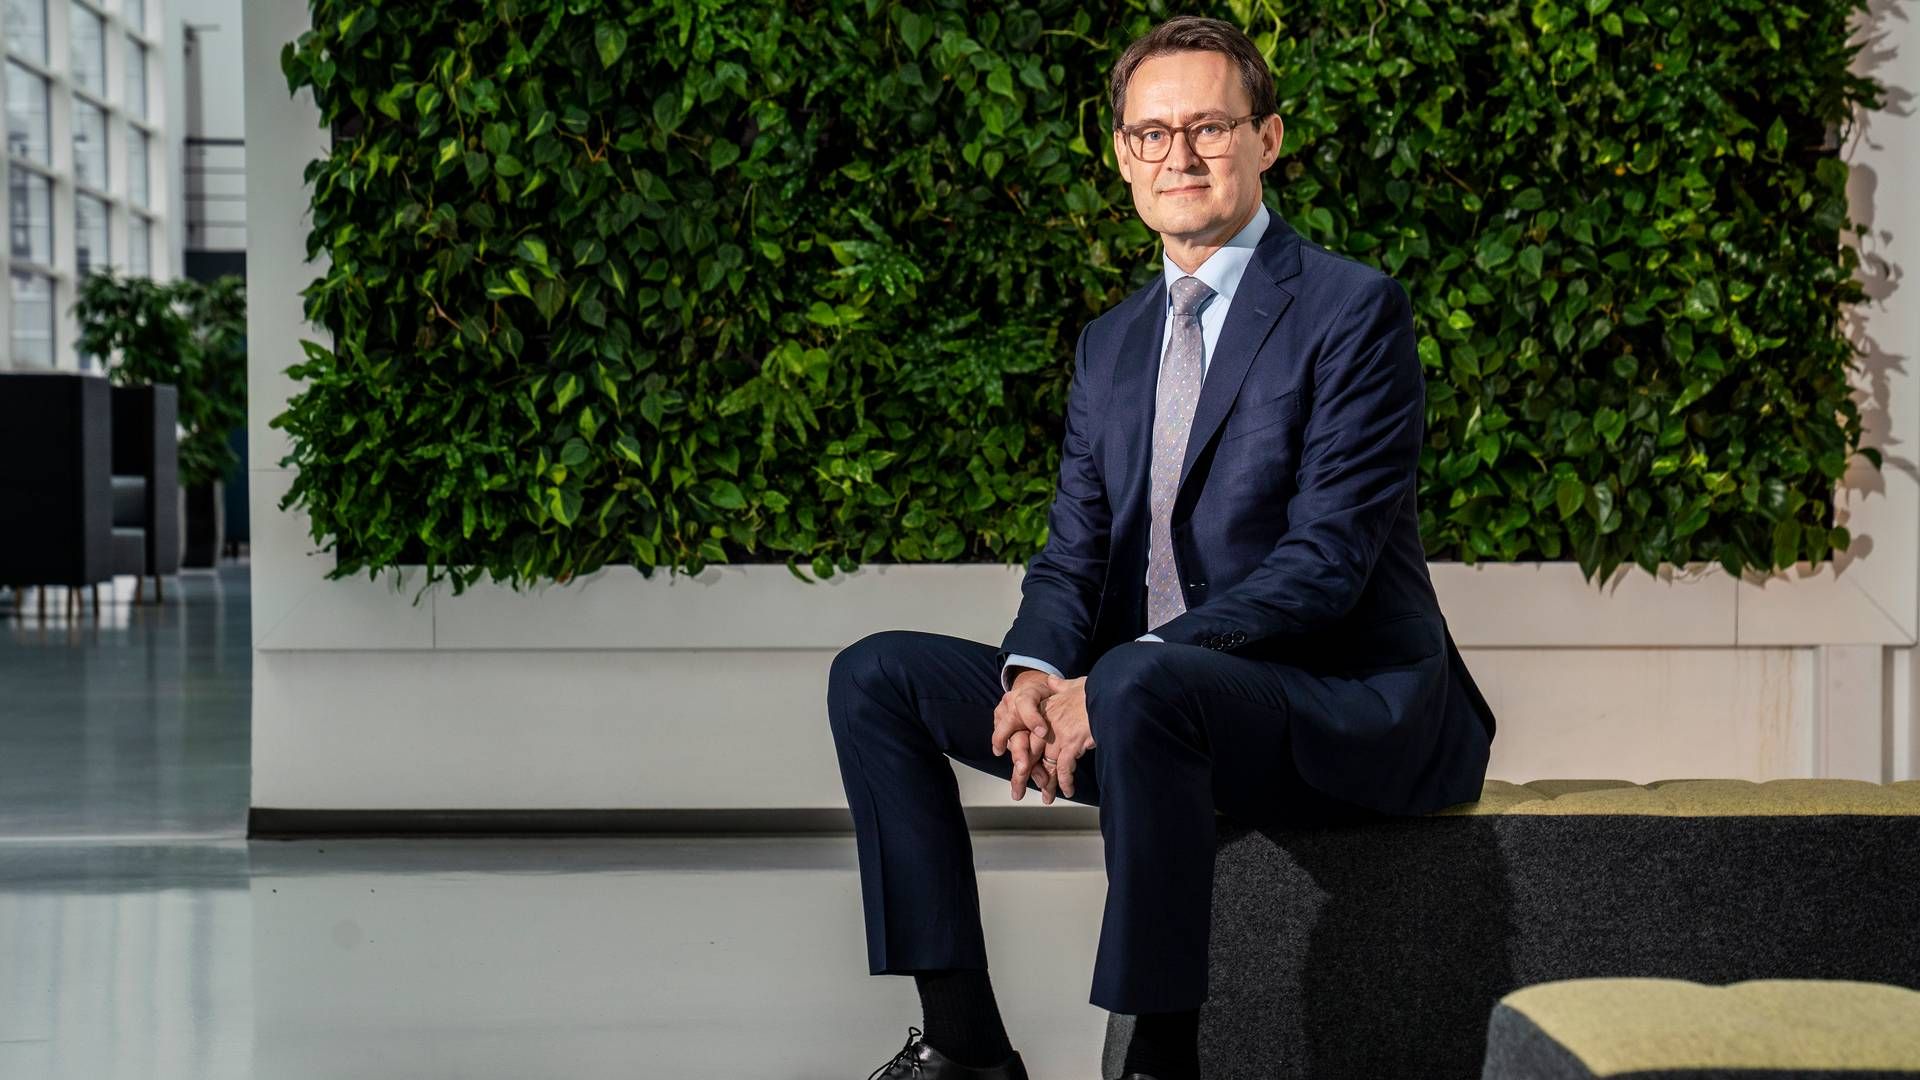 After the transvaginal mesh case, Coloplast CEO Kristian Villumsen will focus on selling Class 3 products in the US surgical business to avoid future litigation similar to the billion-dollar abdominal mesh case. | Photo: Stine Bidstrup